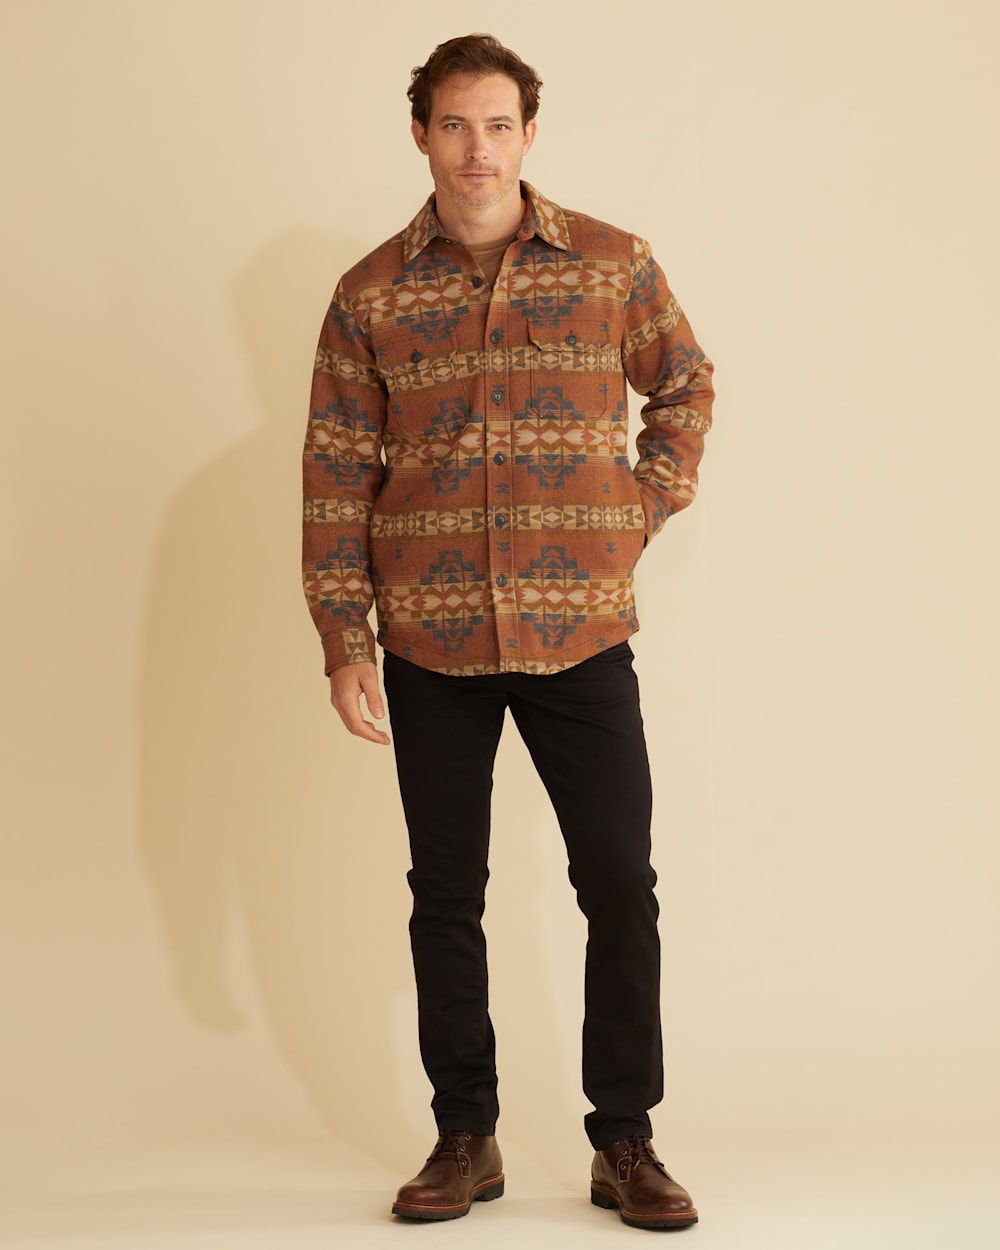 ALTERNATE VIEW OF MEN'S DESERT DAWN QUILTED SHIRT JACKET IN BROWN image number 2